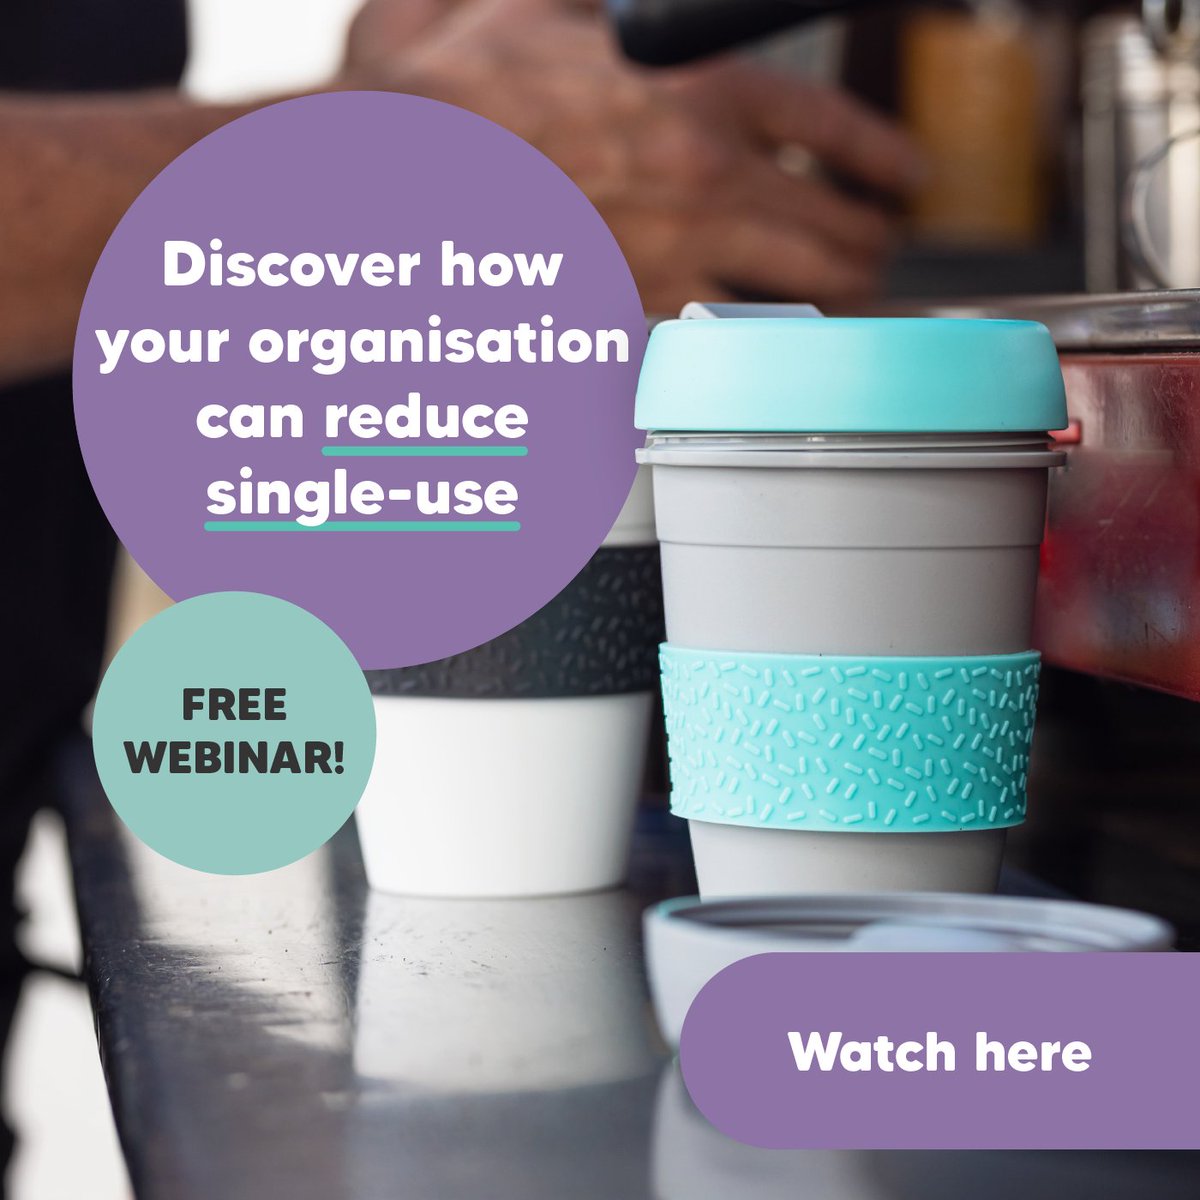 Missed our recent webinar? Catch up on how to reduce #SingleUse in your organisation here: zerowastescotland.org.uk/resources/webi…